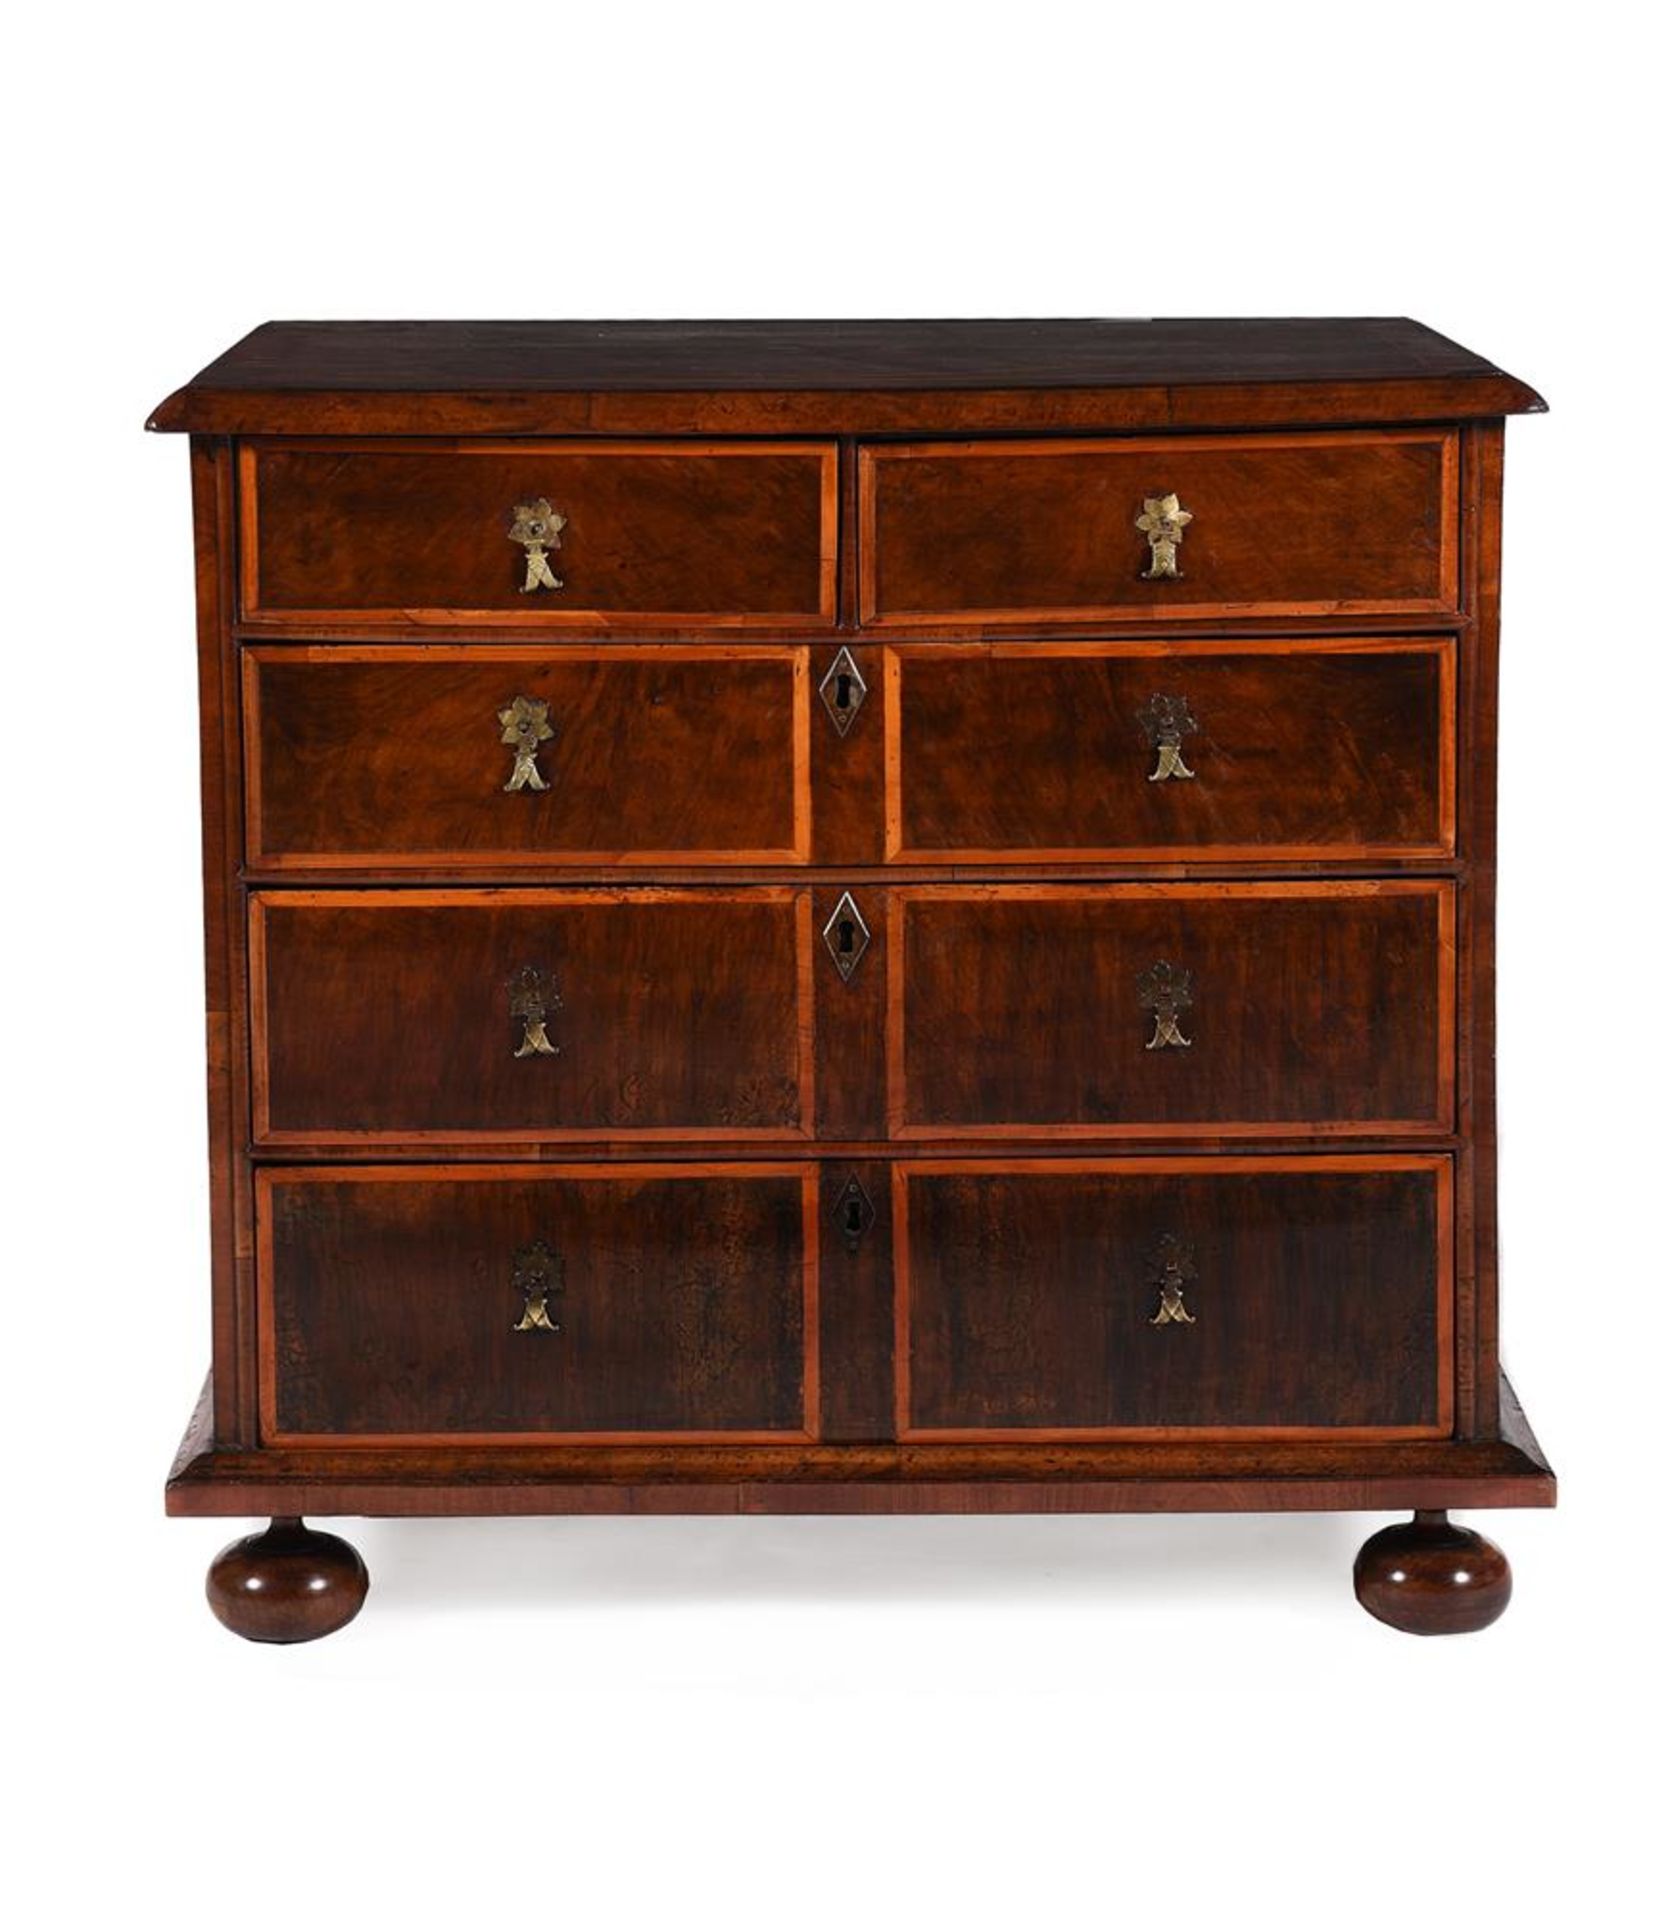 A WILLIAM III WALNUT AND HOLLY BANDED CHEST OF DRAWERS, CIRCA 1700